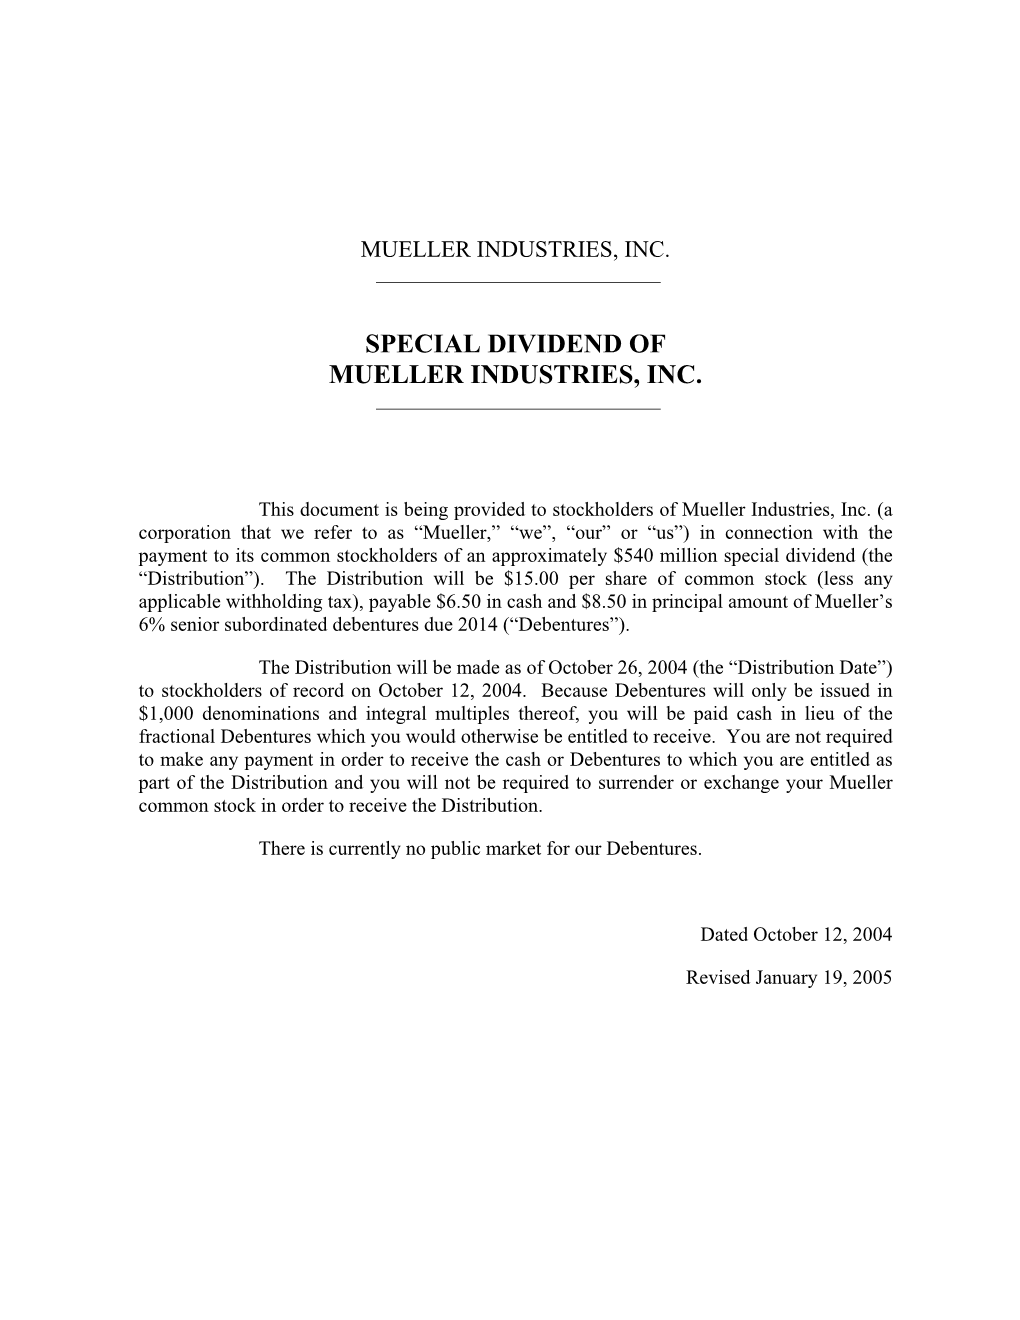 Special Dividend of Mueller Industries, Inc